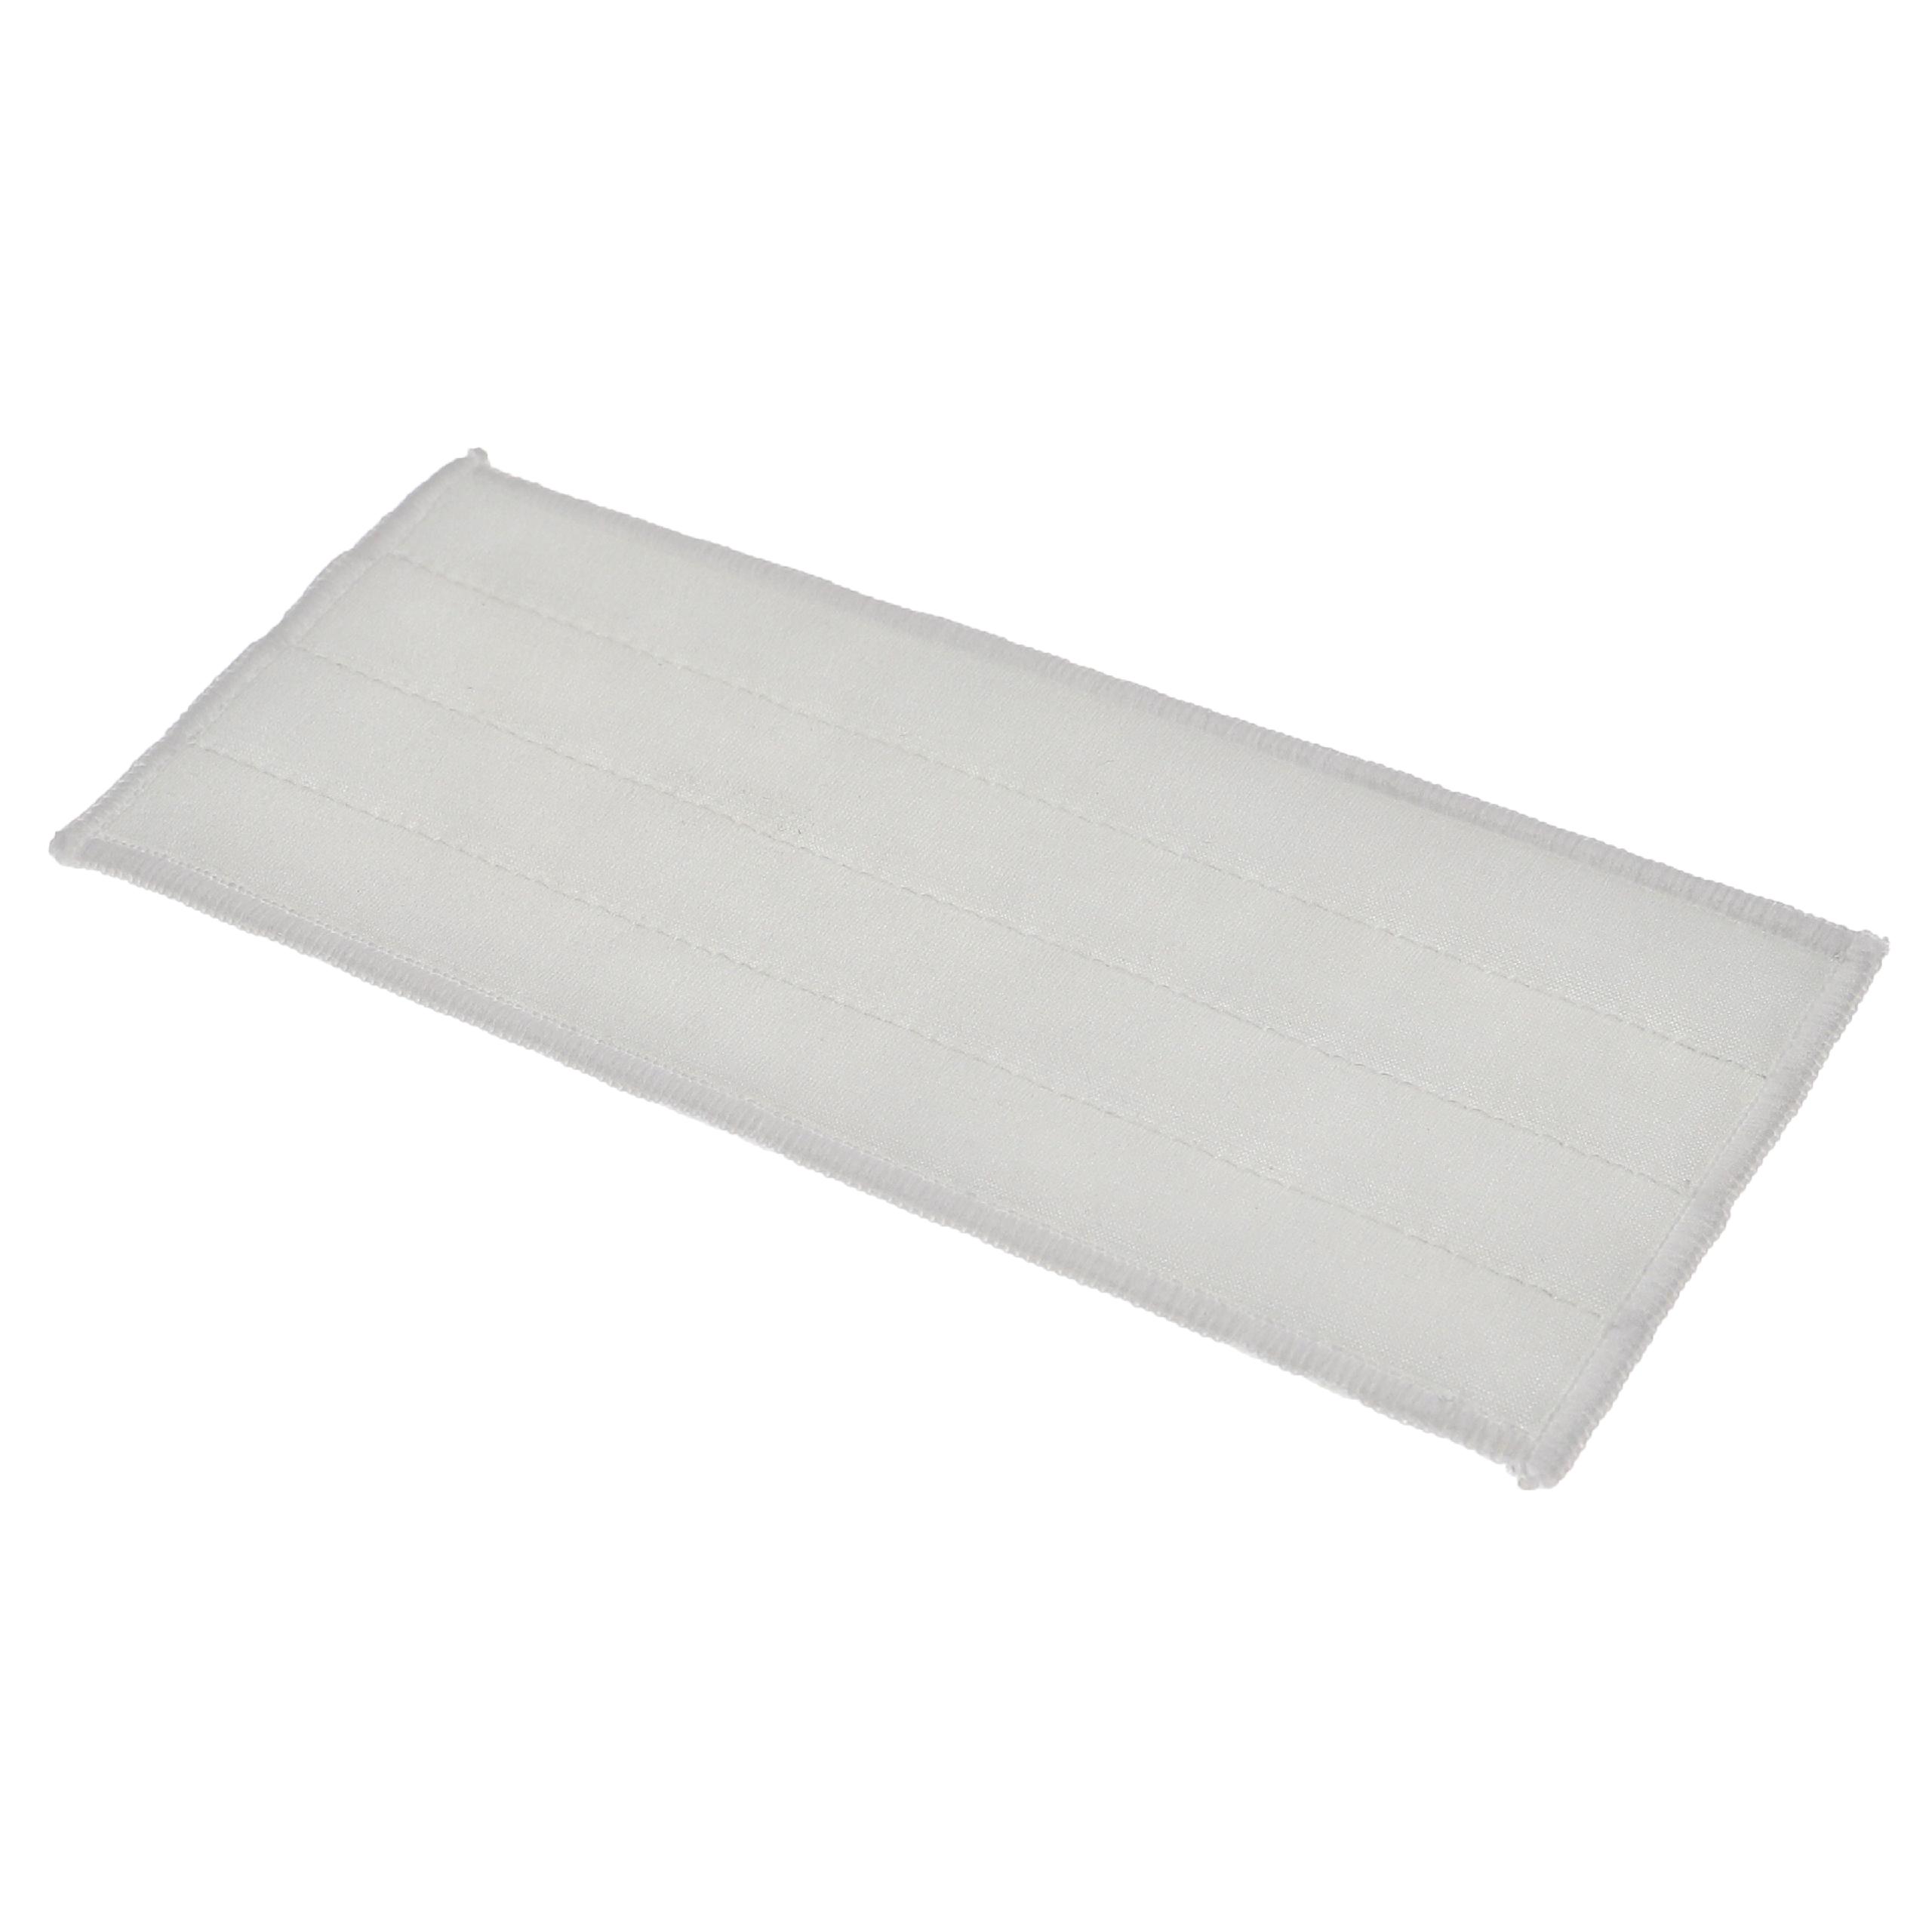 2x Cover Scrubber Sleeve replaces Kärcher 2.633-928.0 for Kärcher Window Cleaner Squeegee